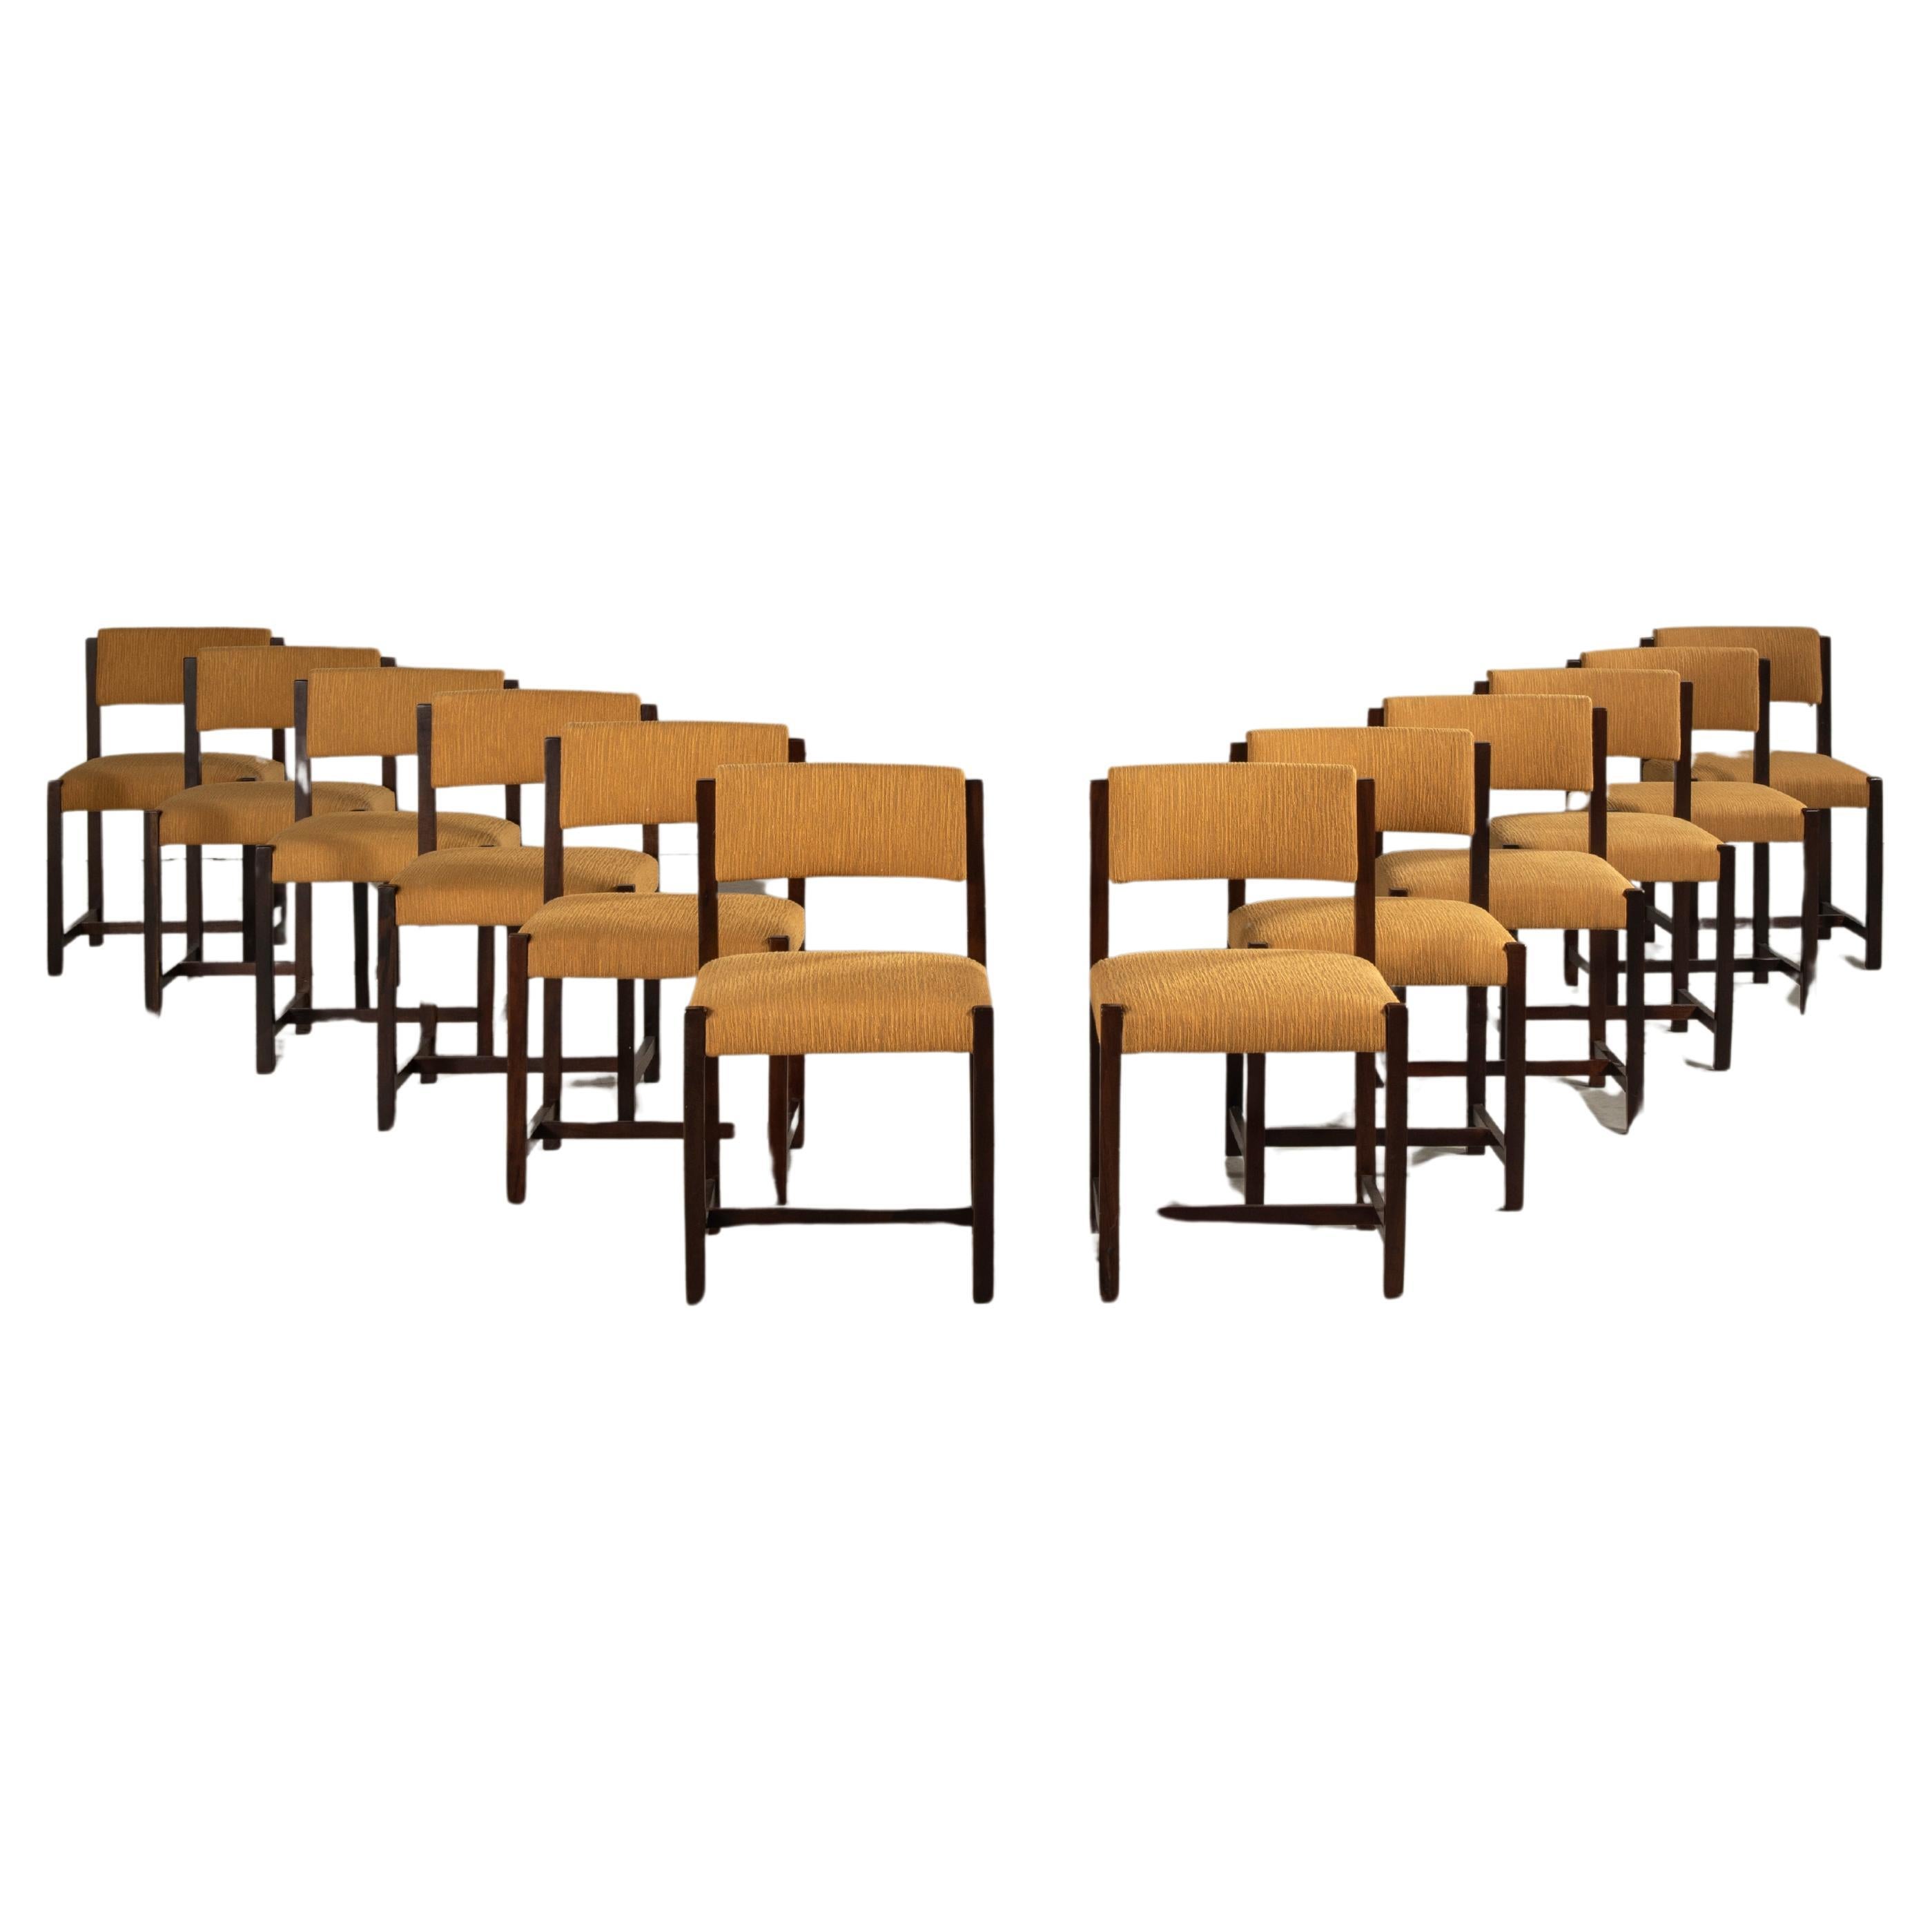 Set of 12 'Del Rey' Dining Chairs, by Jorge Zalszupin, Brazilian Modern For Sale